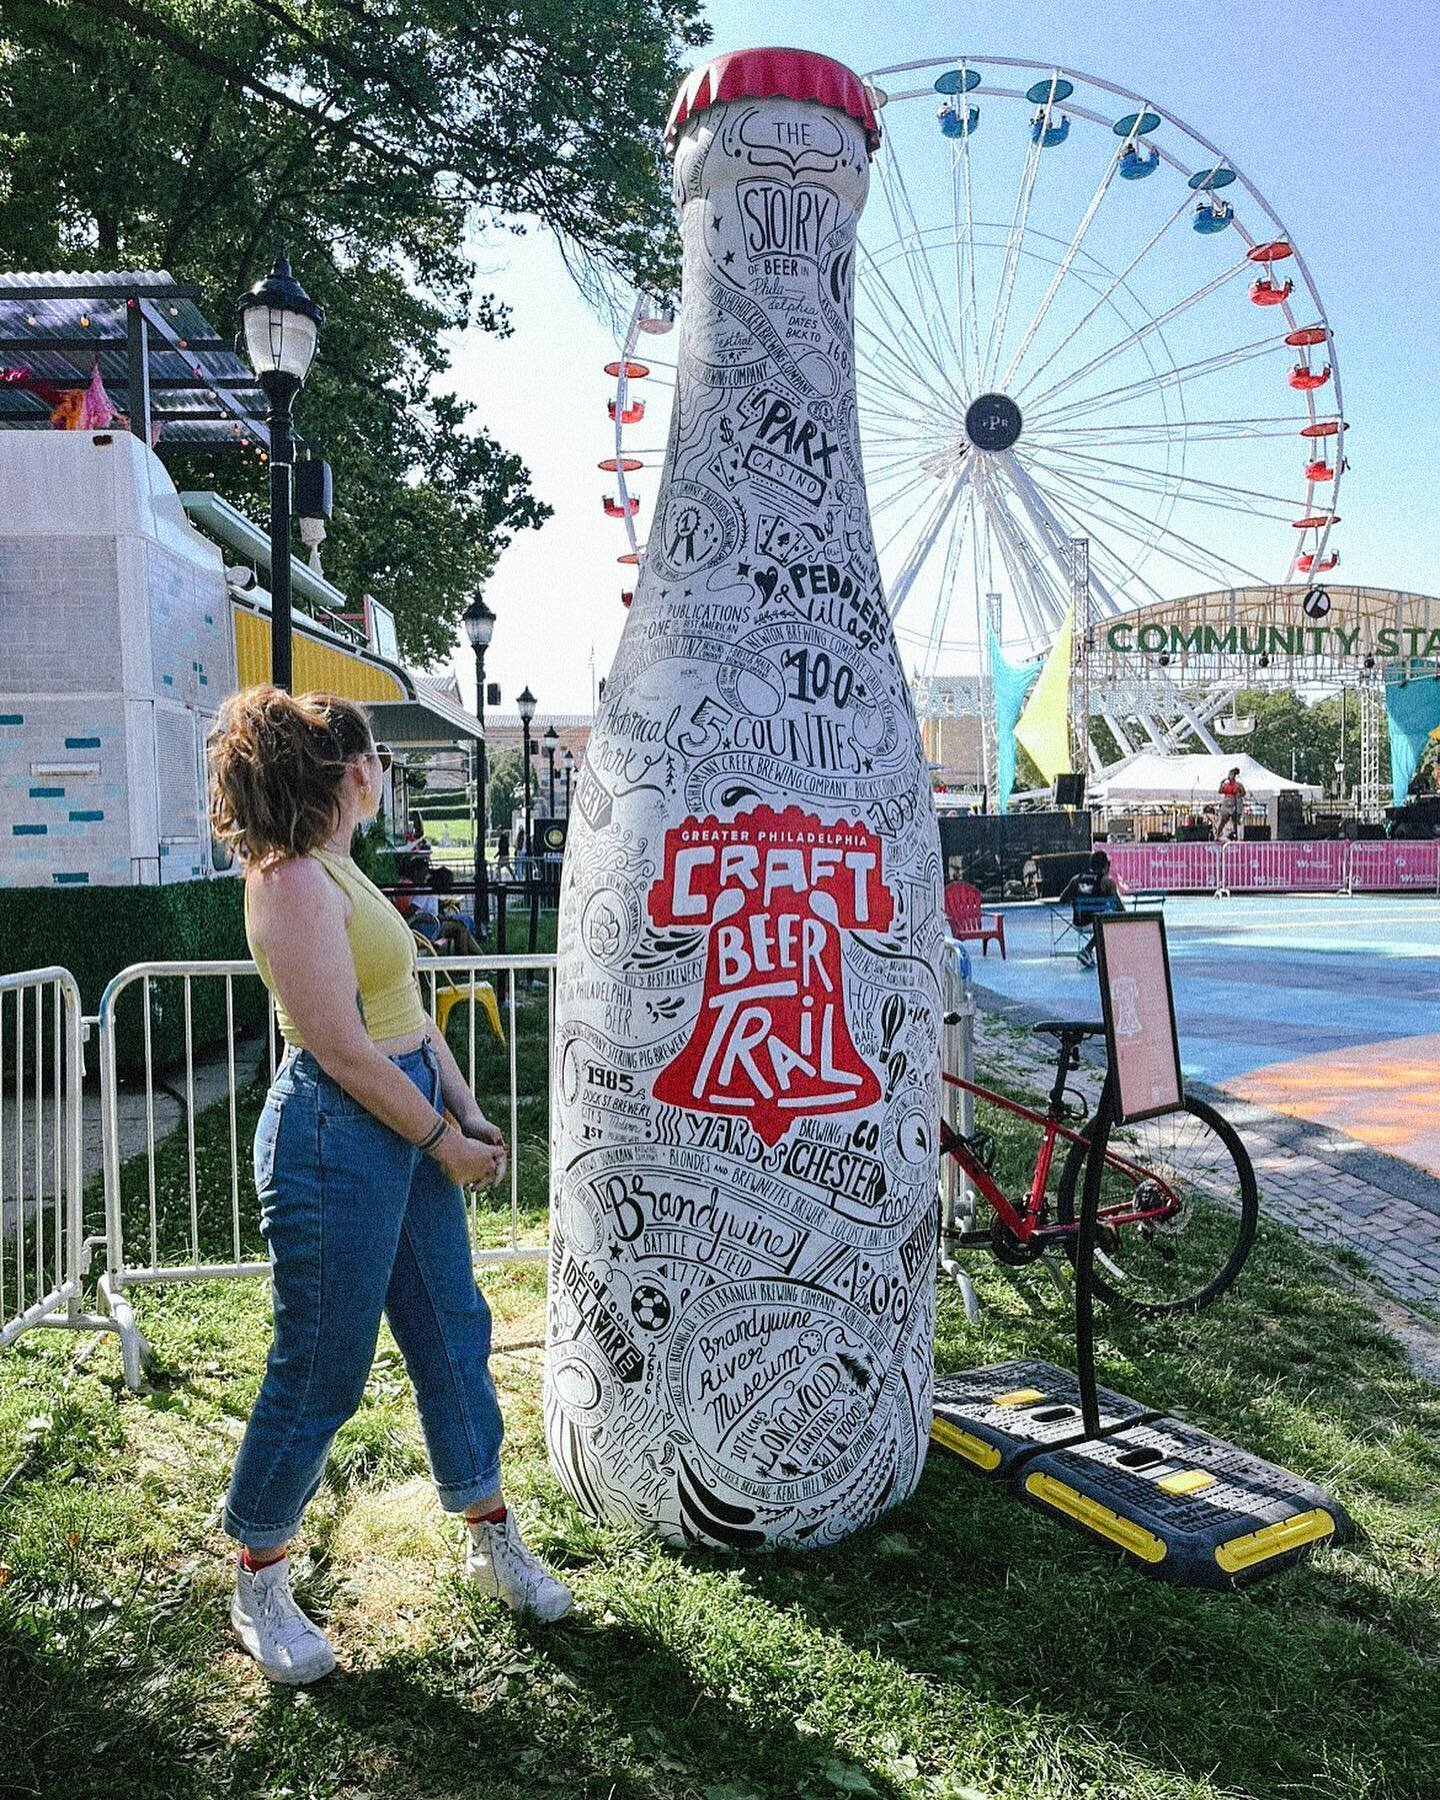 Drink beer, ride the wheel, and checkout this giant bottle I got to help create @theovalphl right in front of the Art Museum 🍻🎡
*
*
*
#beergarden #beerfest #graphicdesigner #illustrator #femaletattooartist #visitphilly #philadelphia #muralart